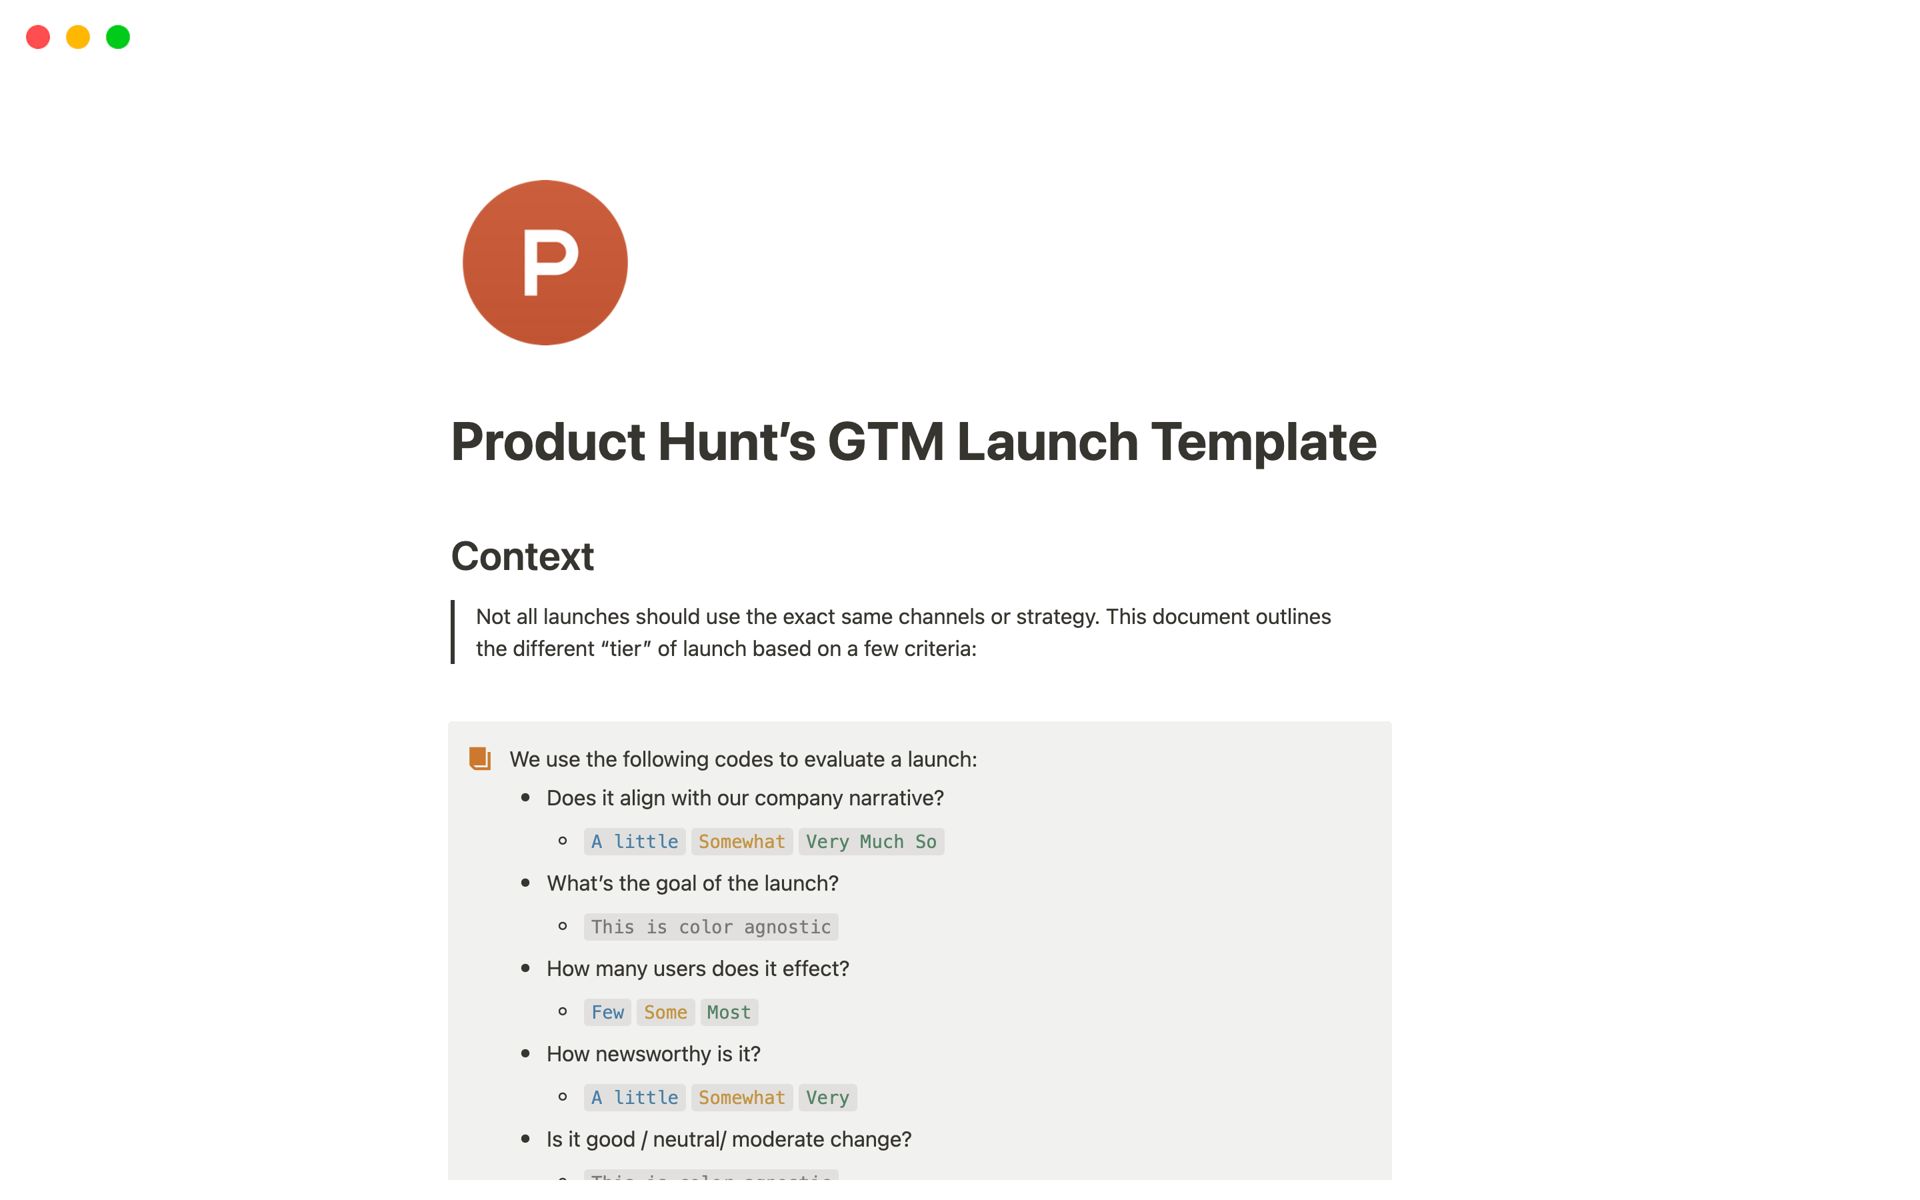 Align go-to-market teams with Product Hunt’s GTM Launch template.